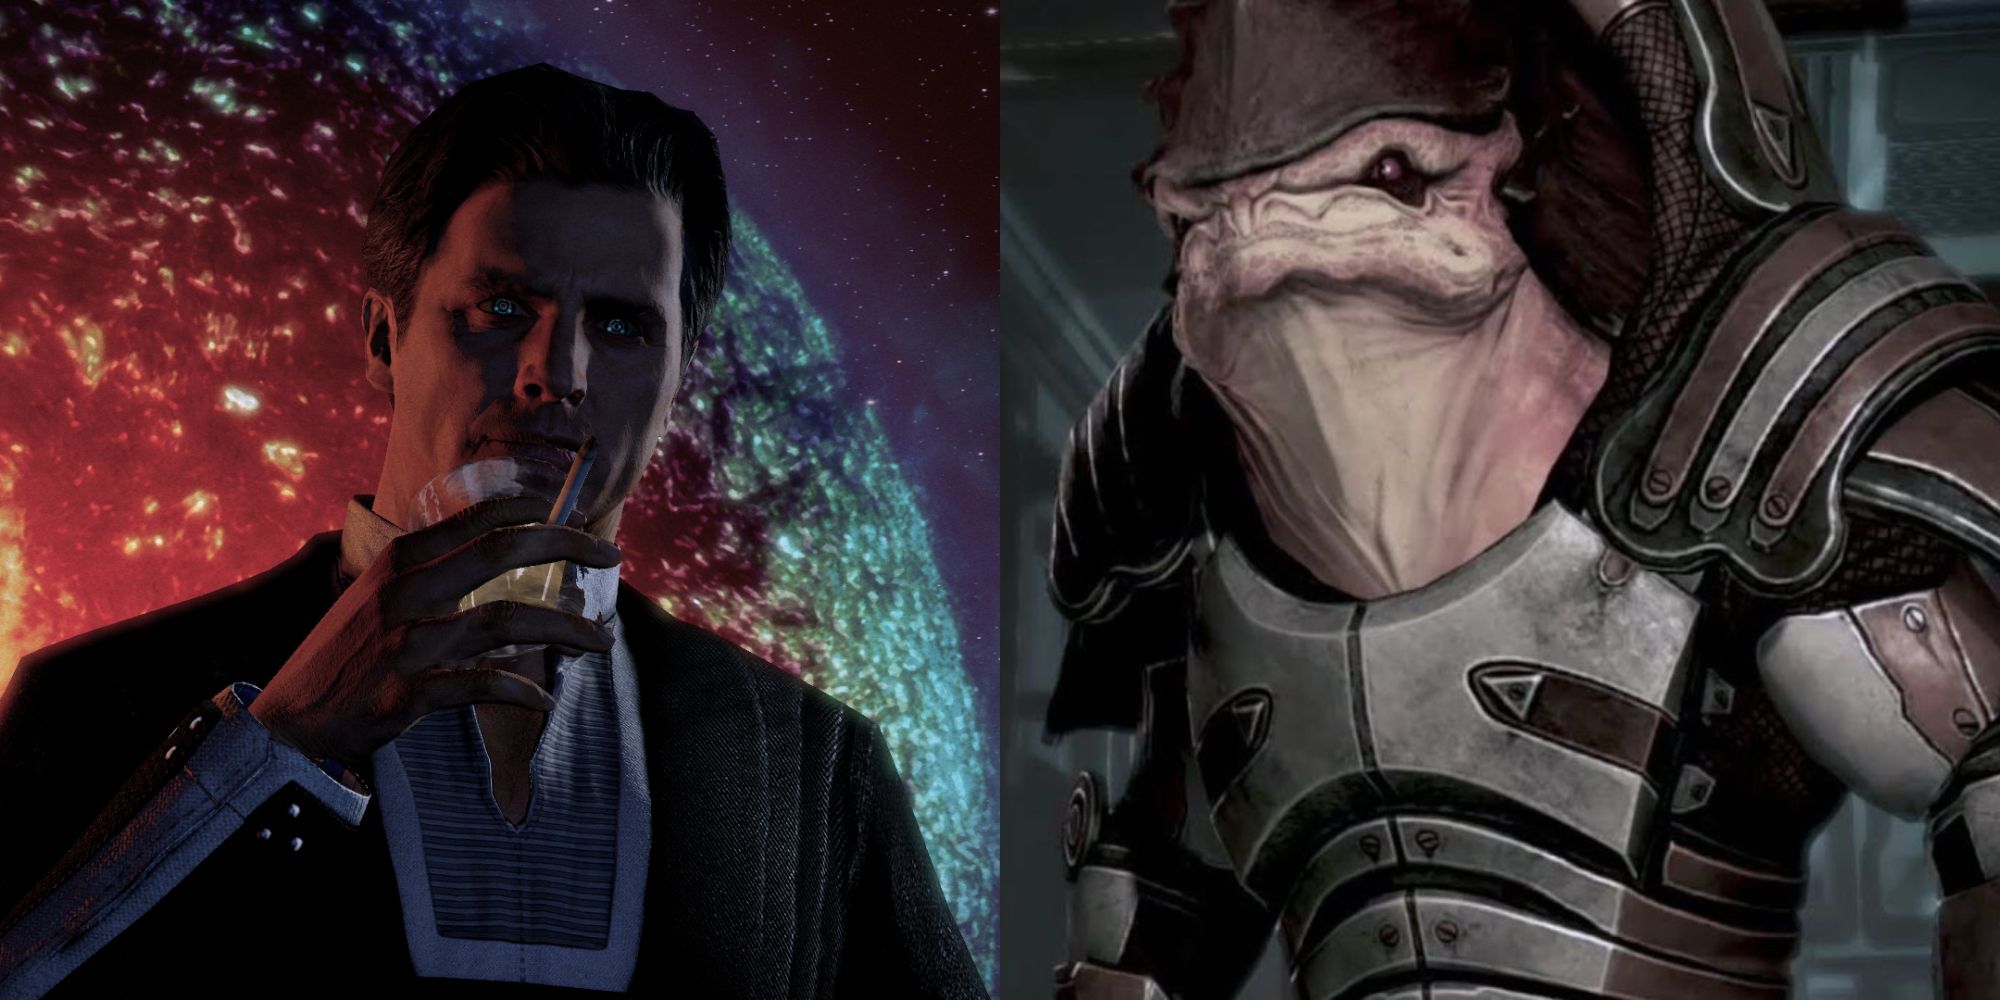 Split image showing The Illusive Man and Urdnot Wreav in Mass Effect.